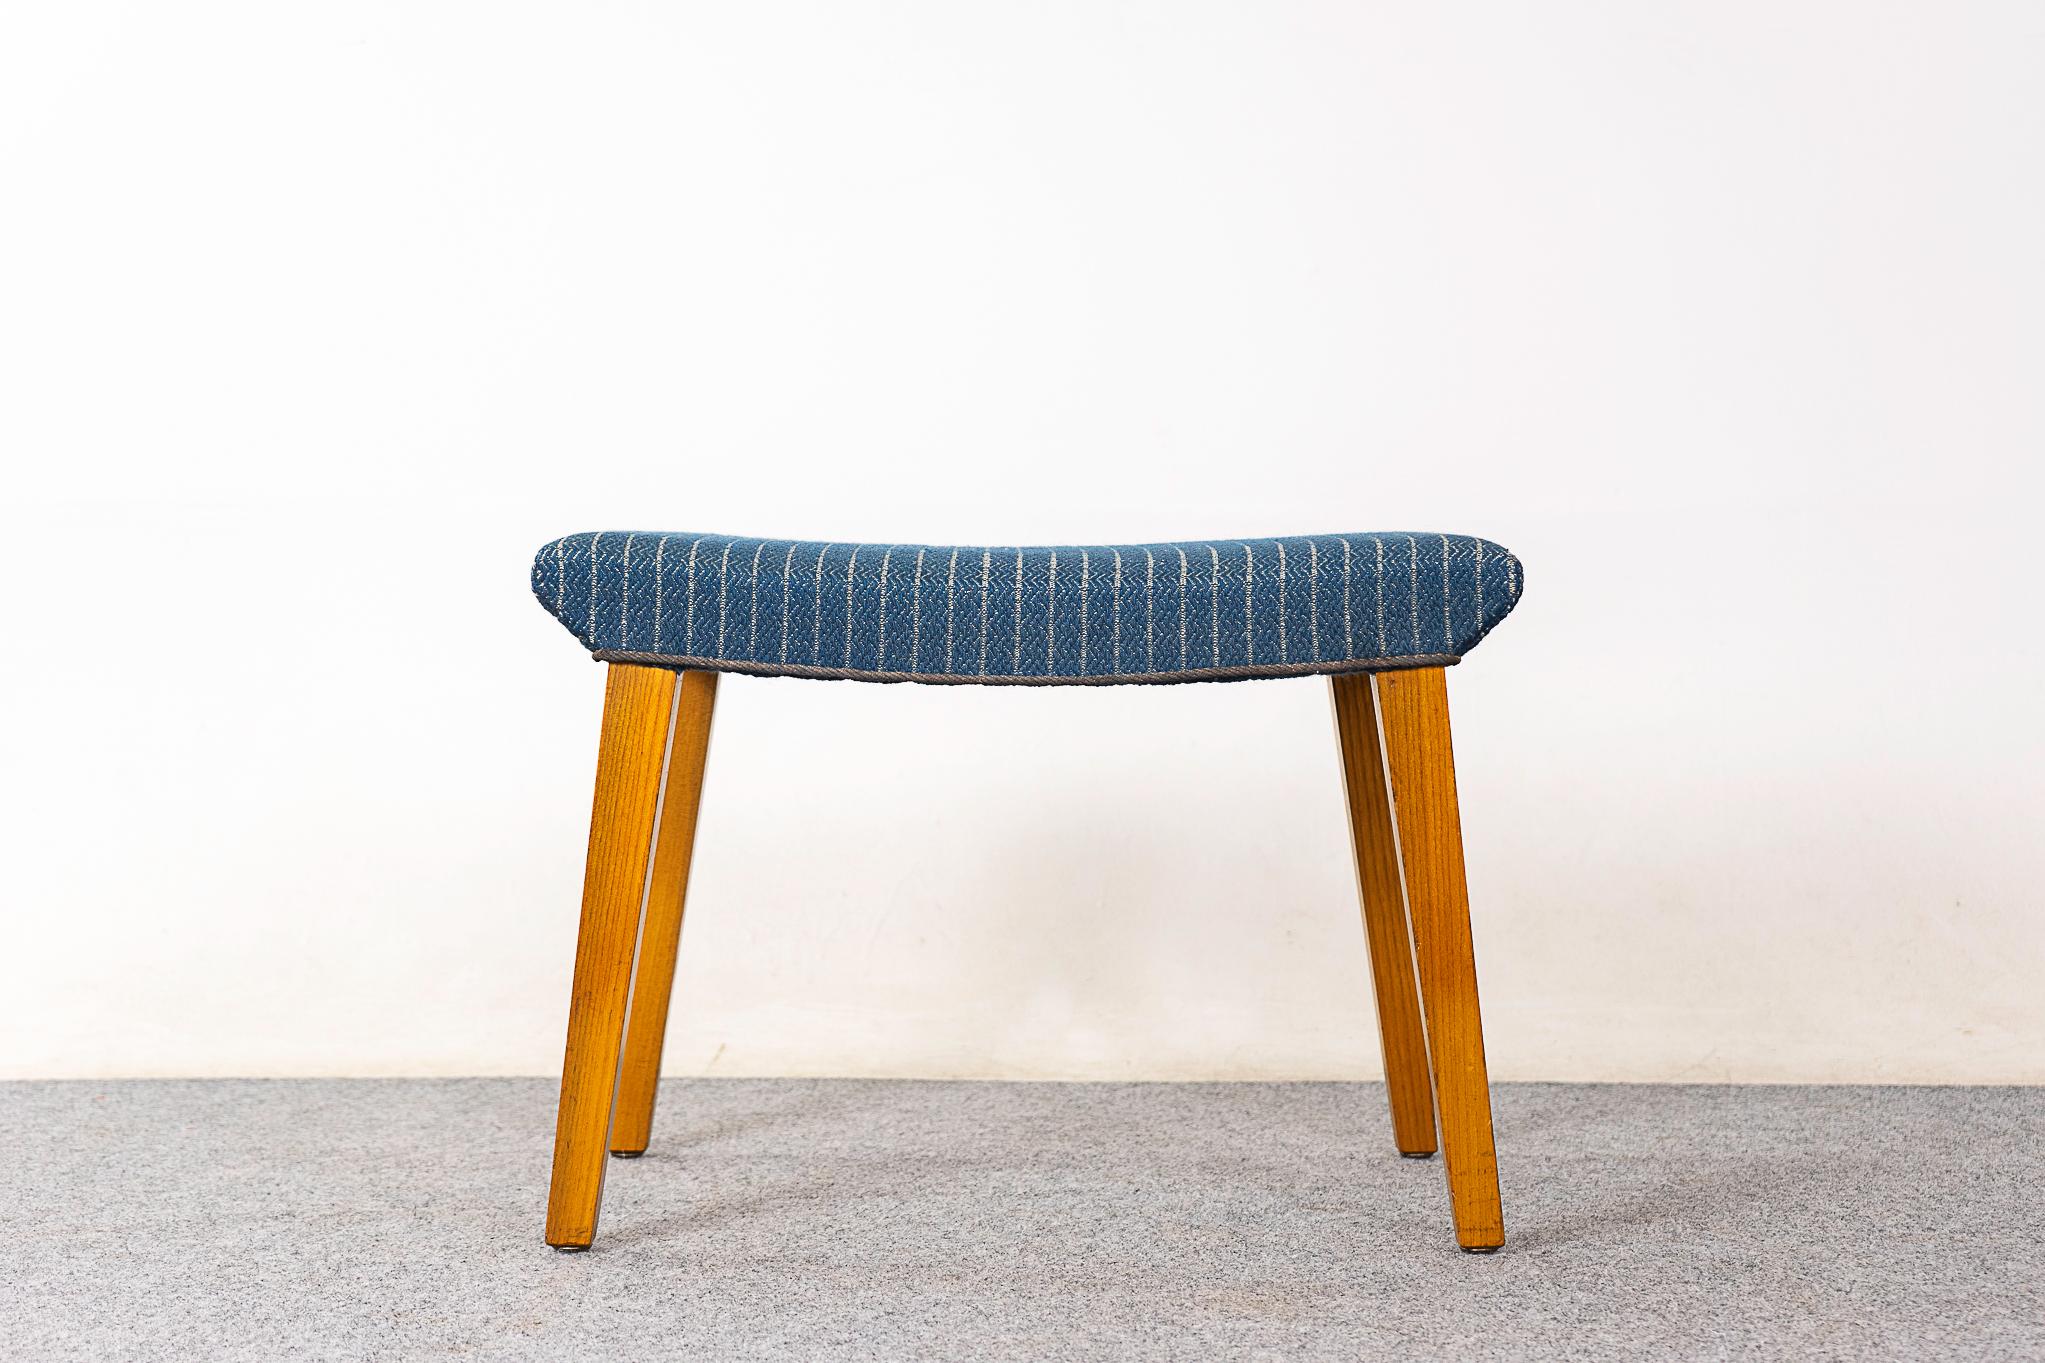 Elm footstool, circa 1950's. Spayed legs and original upholstery with minor wear and tear. 